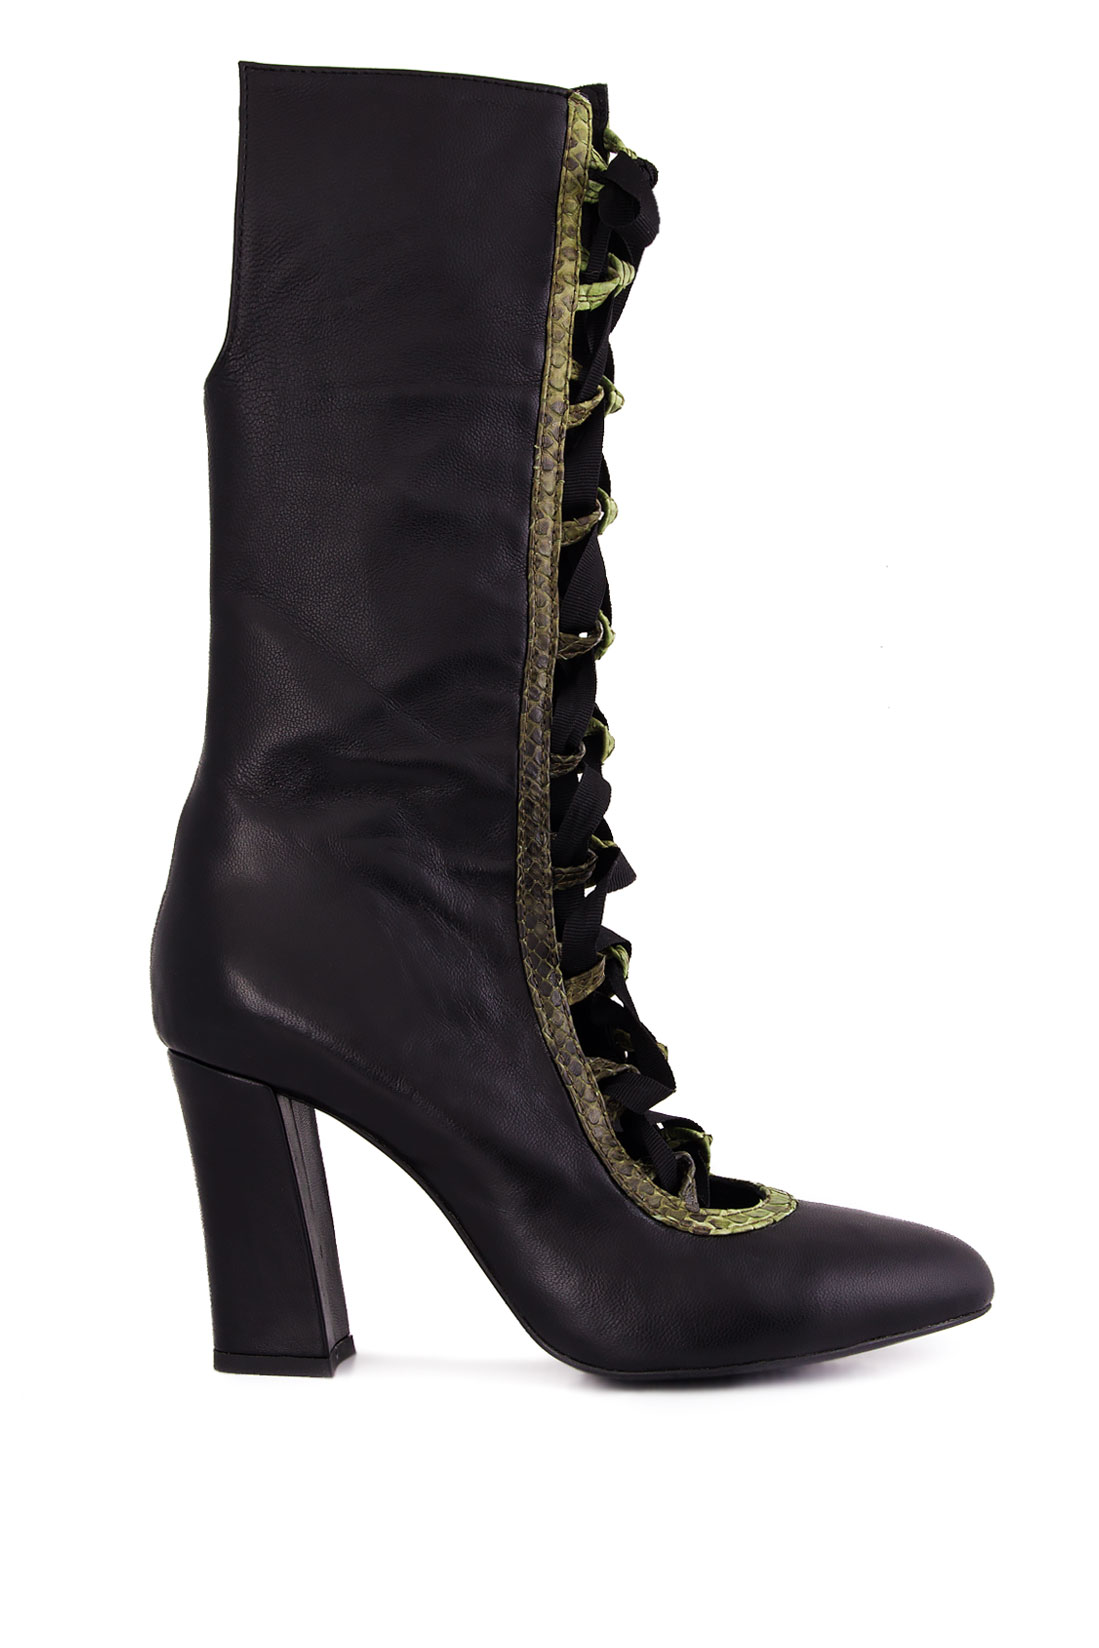 Lace-up python and leather boots Ana Kaloni image 0